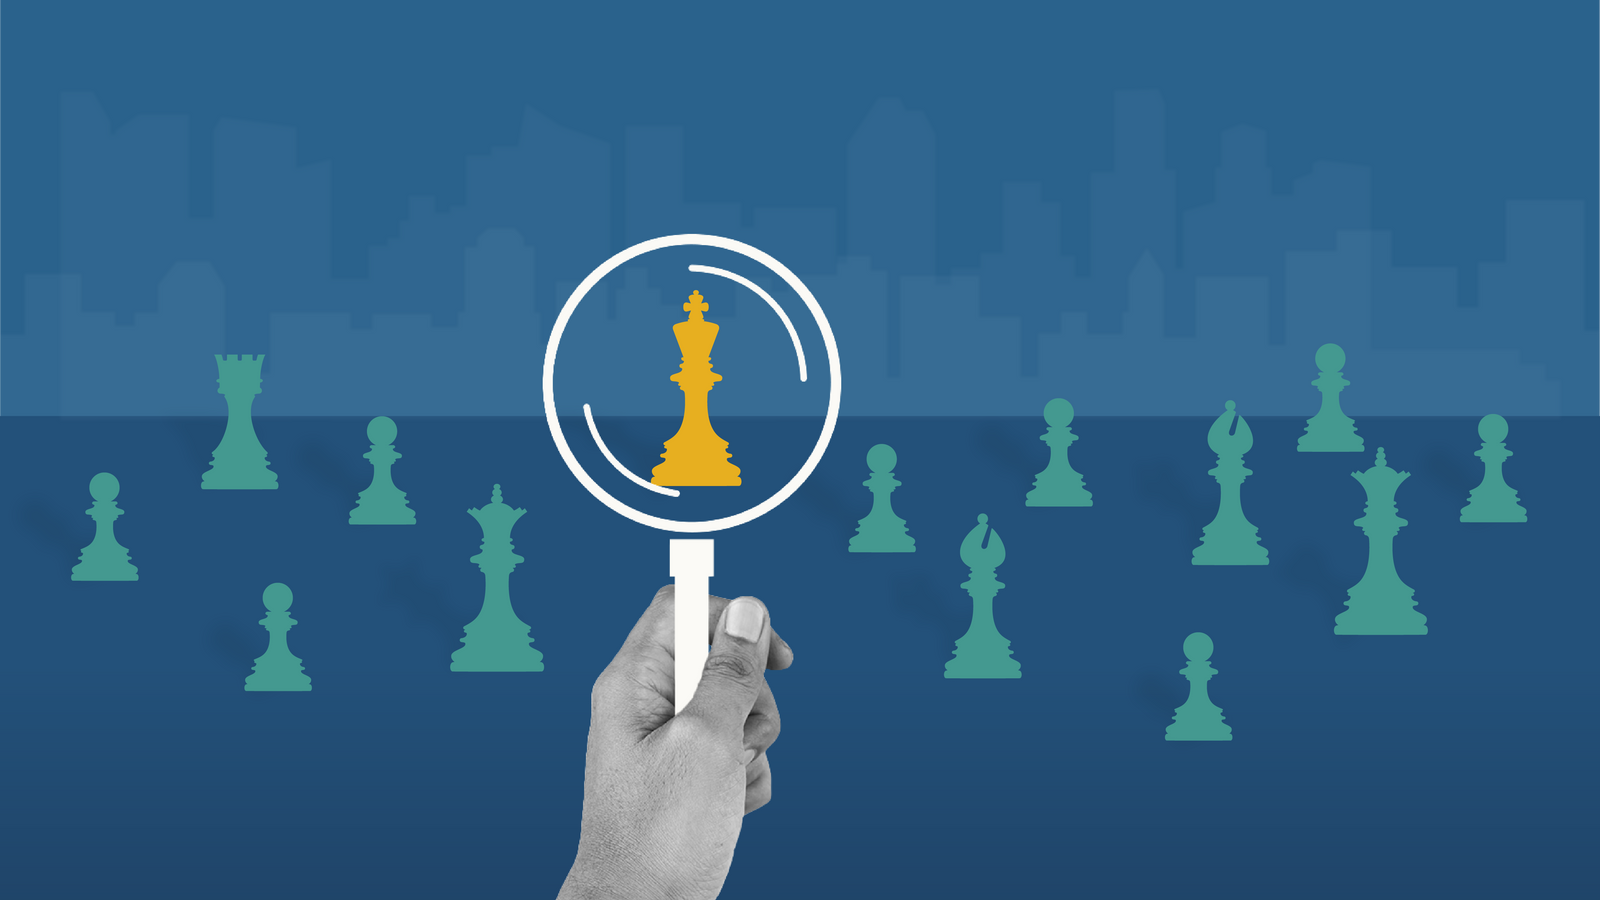 Illustration of chess pieces with hand holding a magnifying glass over the King